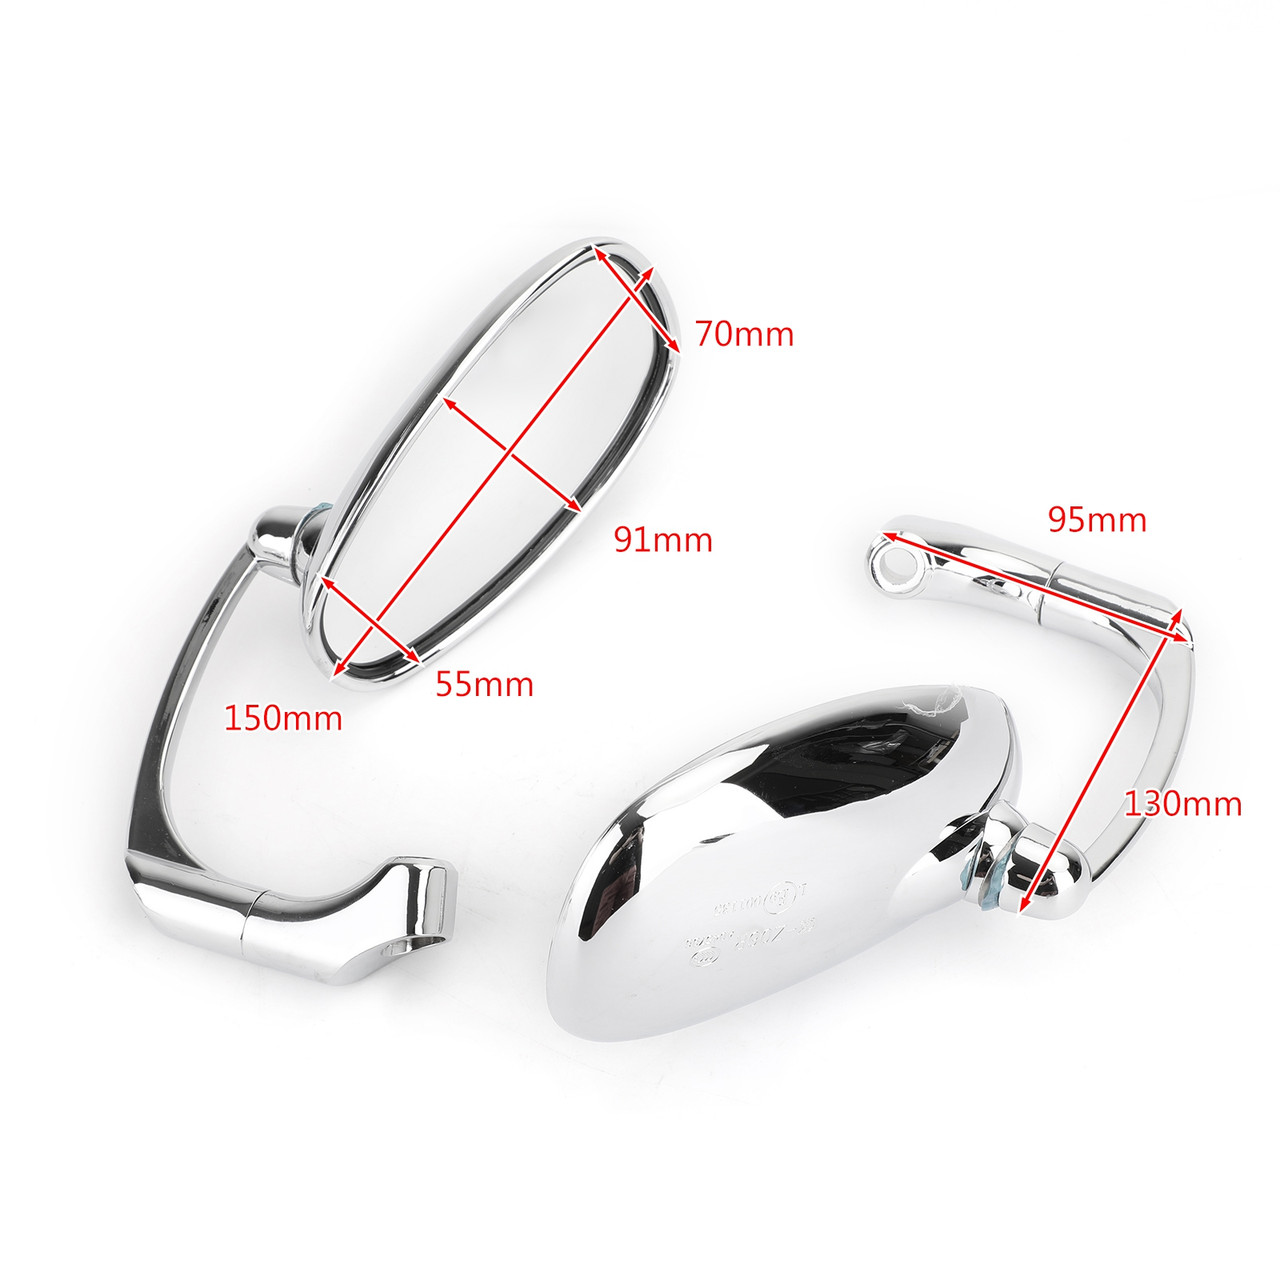 Motorcycle L-bar Retro Oval Rearview Side Mirrors M8 / M10 Pair fits for Honda with Standard Metric Screws Chrome~BC2